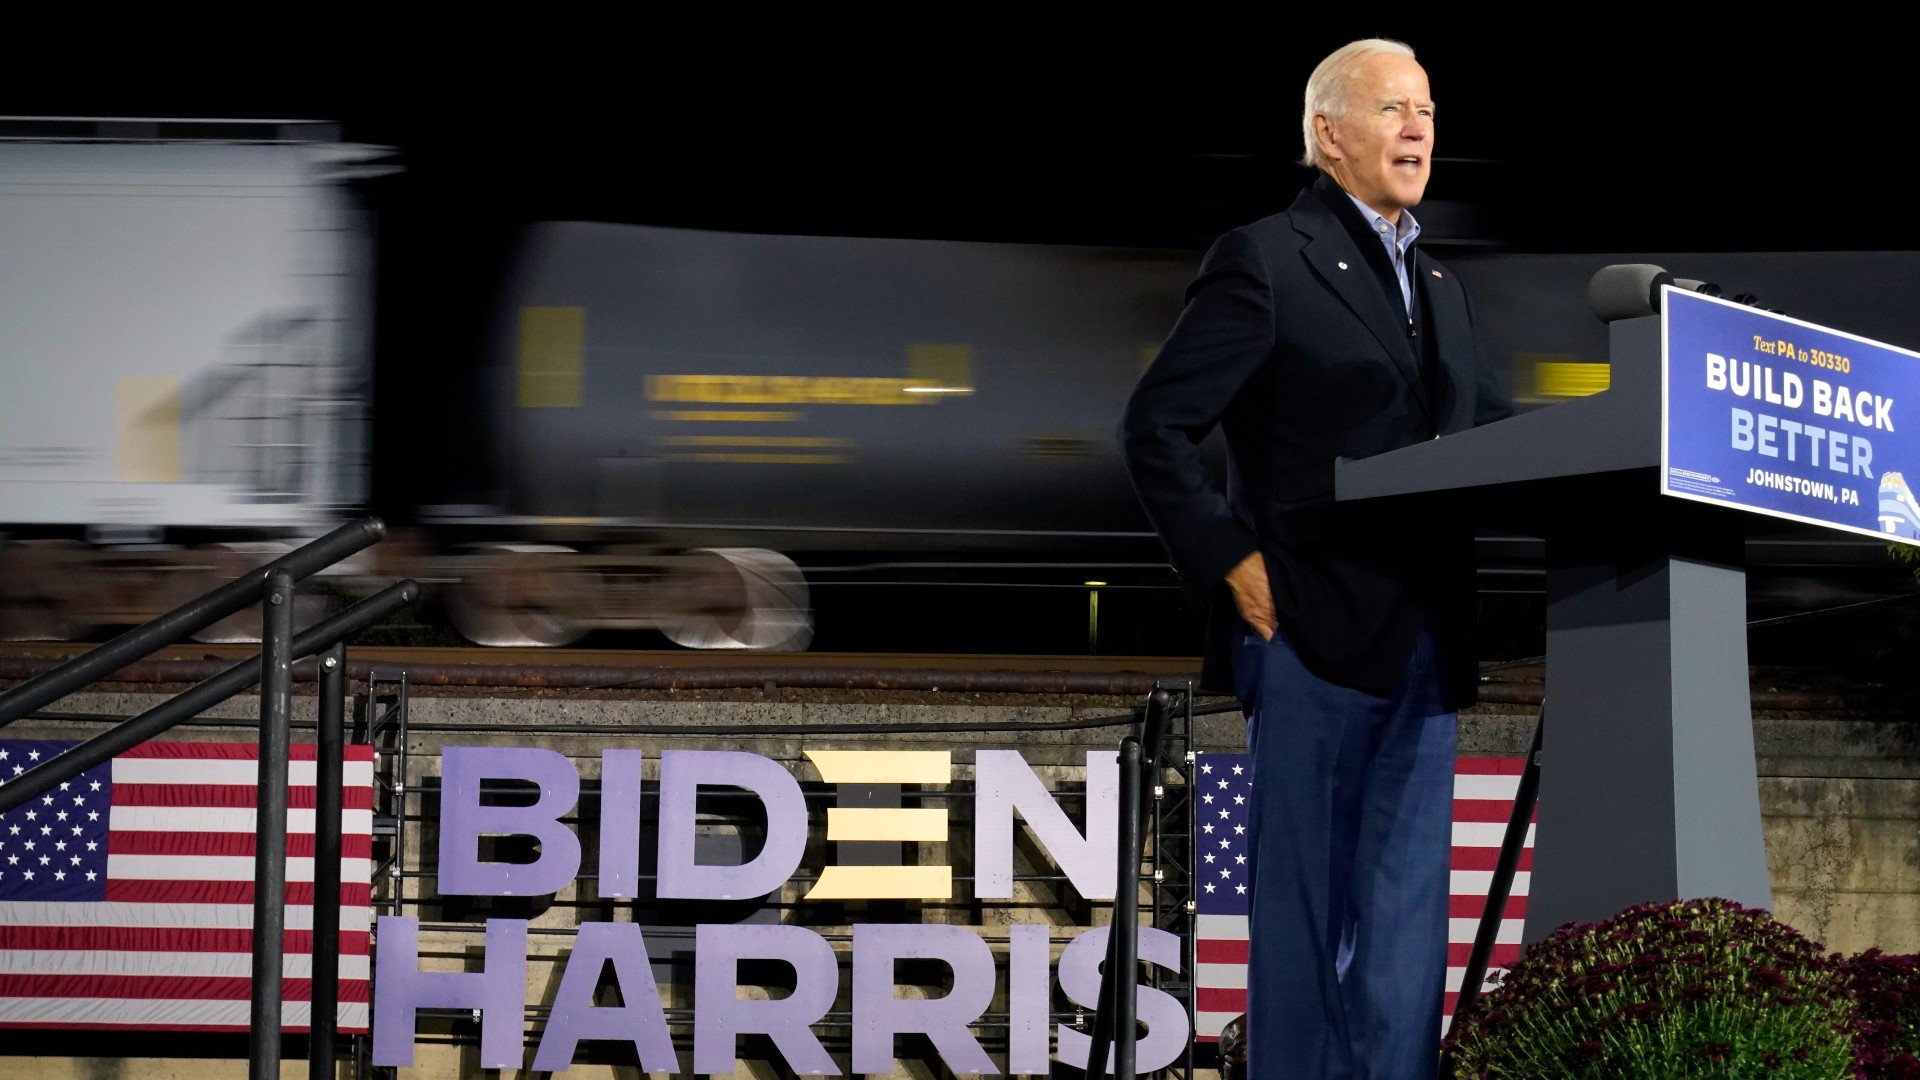 Biden said the rail workers will get better pay, improved working conditions and “peace of mind around their health care costs: all hard-earned.”